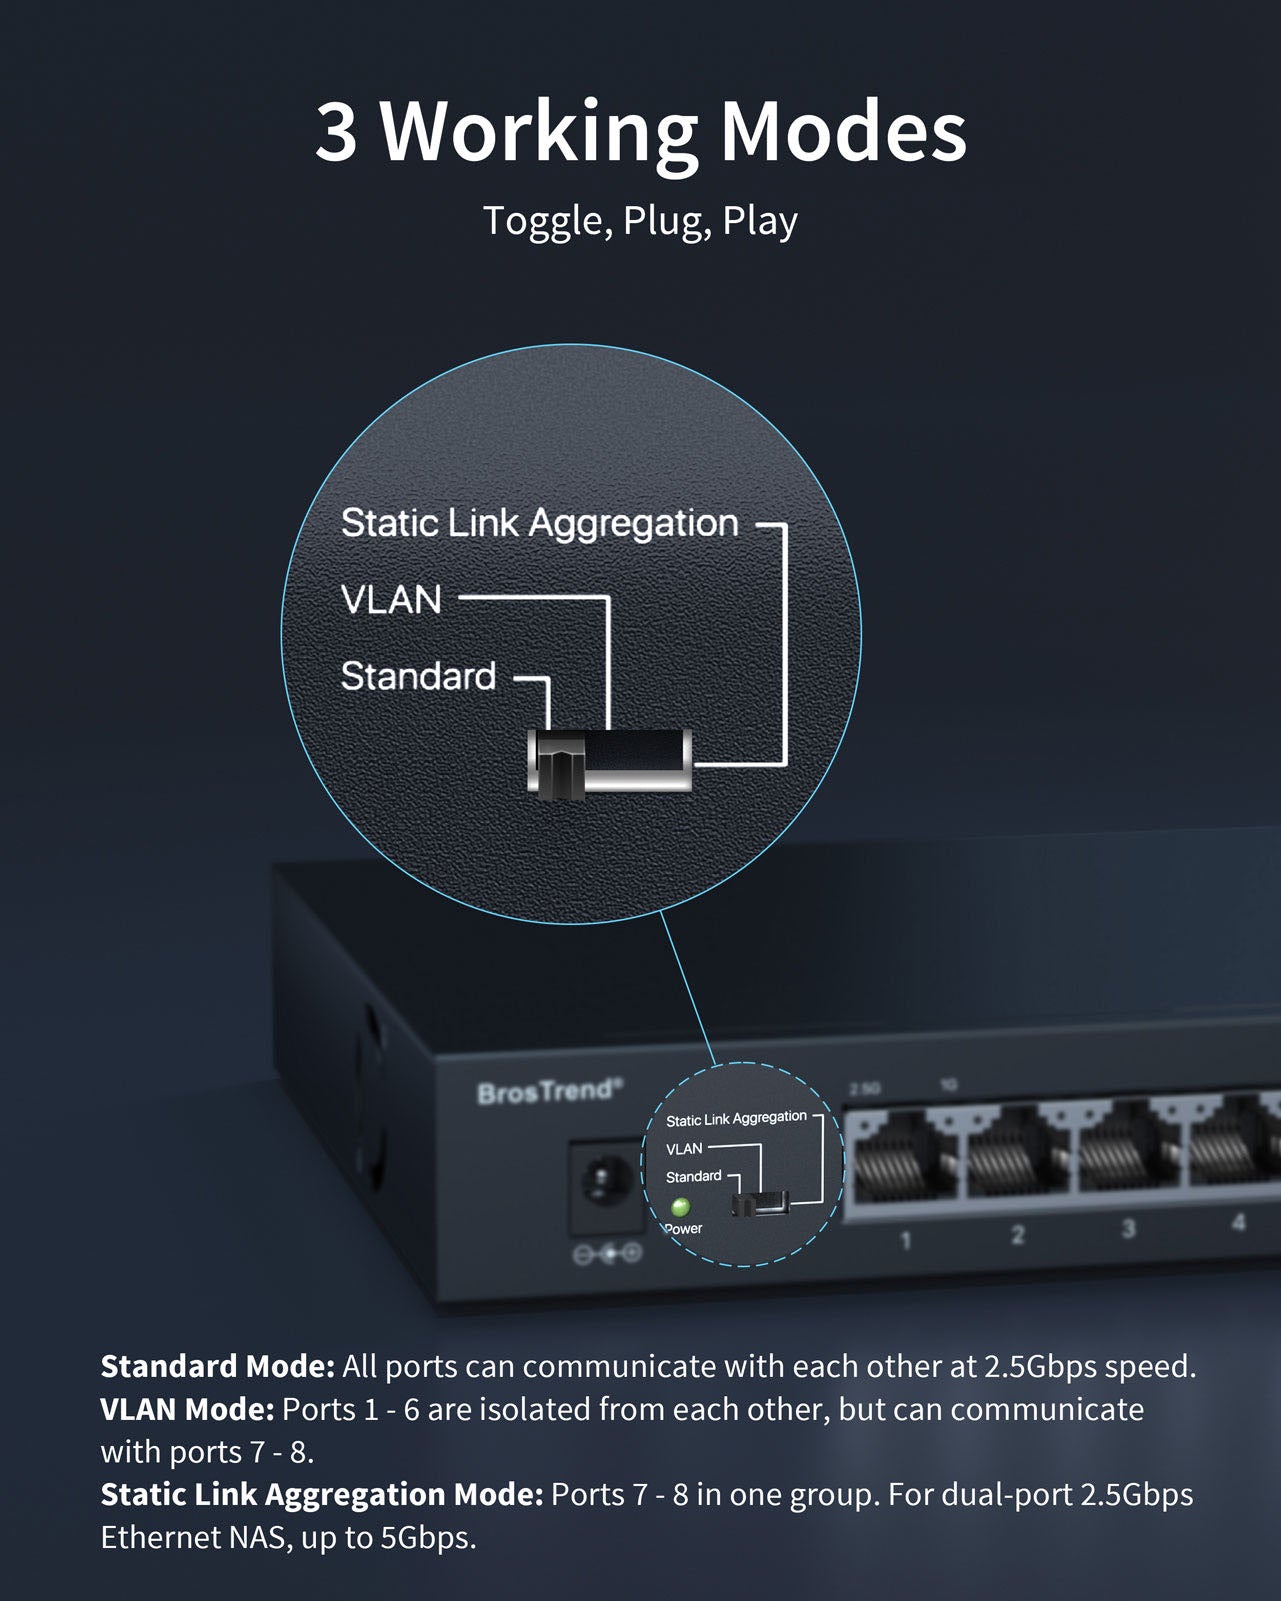 BrosTrend 8-port 2.5G Ethernet Switch Supports Plug-and-Play with No Software Installation Configuration Needed Use Hardware Toggle Button to Shift among 3 Working Modes Including Standard Mode Static Link Aggregation Mode and VLAN Mode